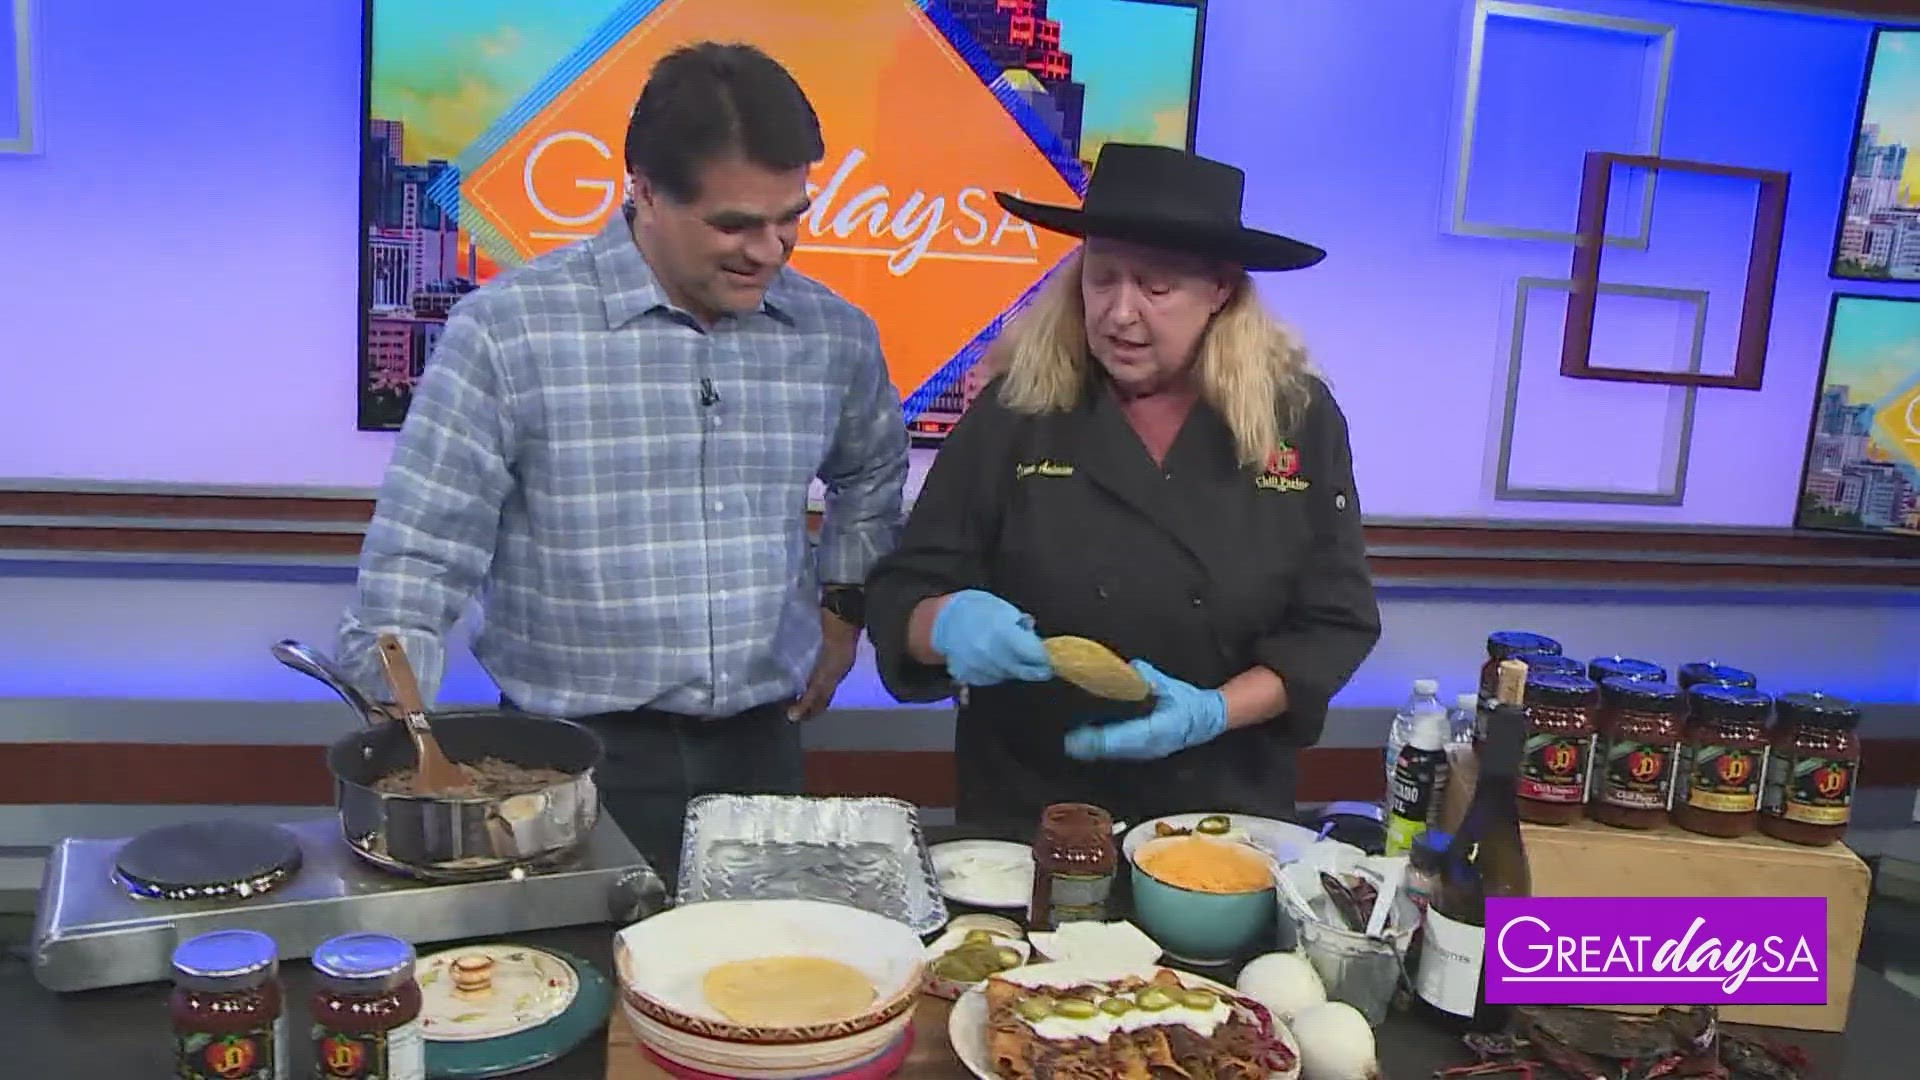 The Modern Chili Queen of Texas, Chef Diana Anderson, teaches Paul how to make an easy enchilada dish.